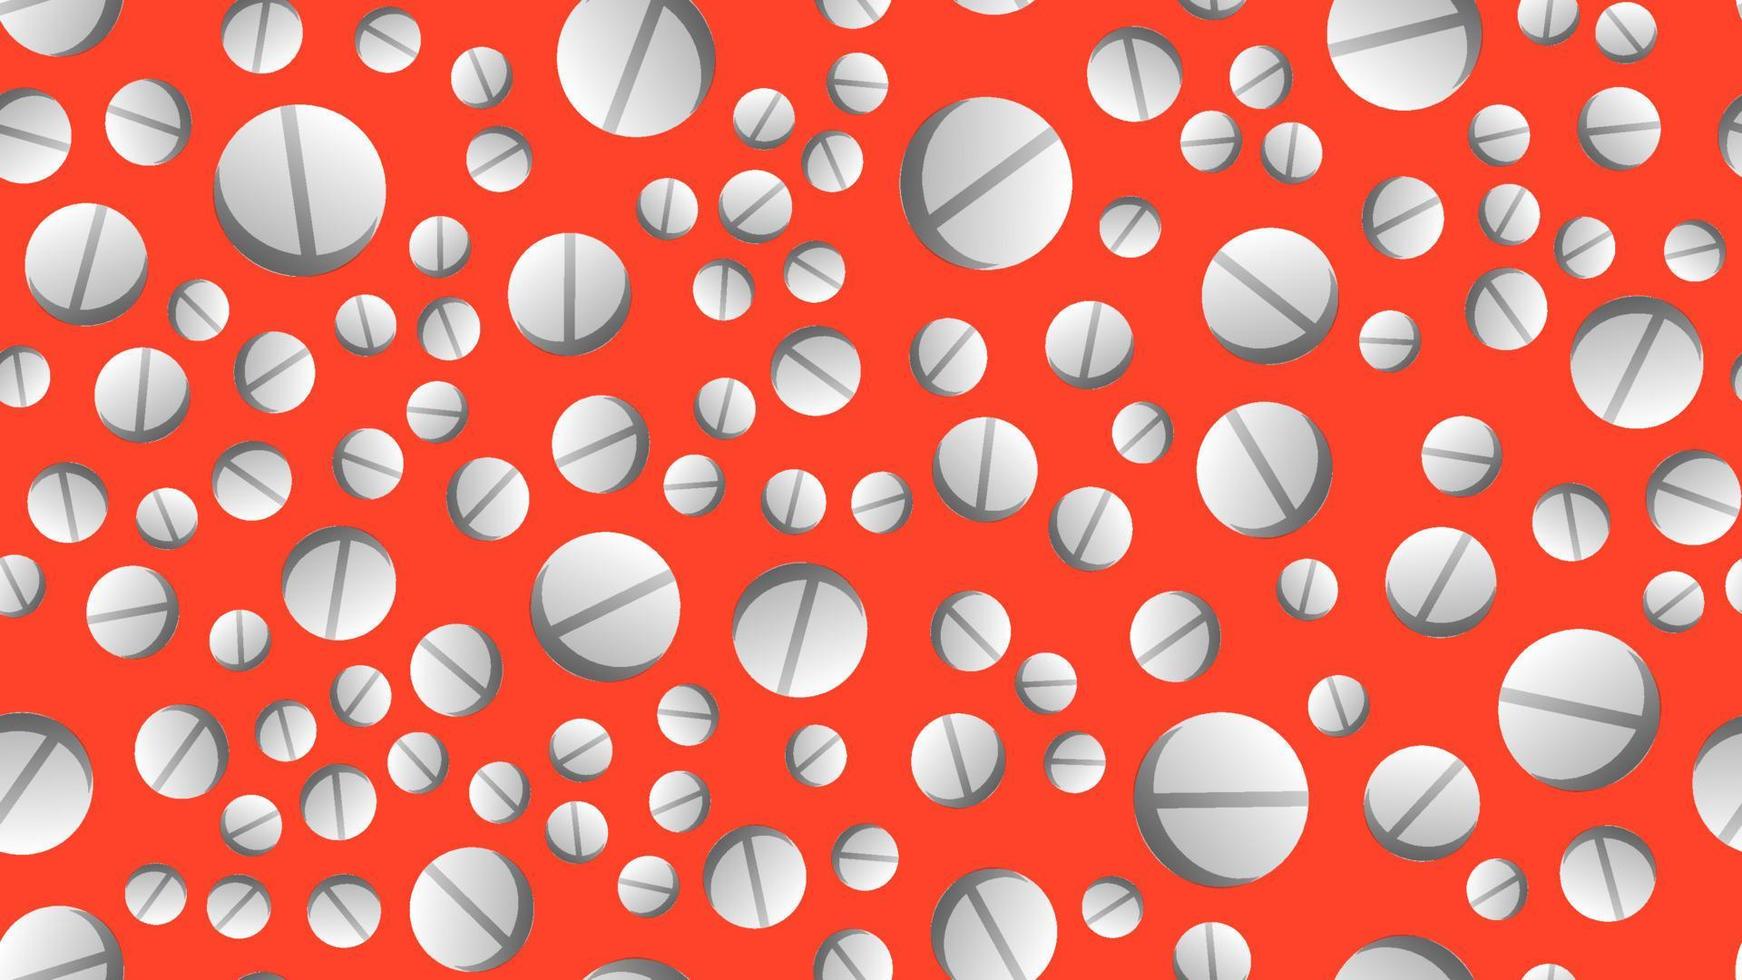 Endless seamless pattern of medical scientific medical items, pharmacological tablets and medications, pill capsules on an orange background. Vector illustration